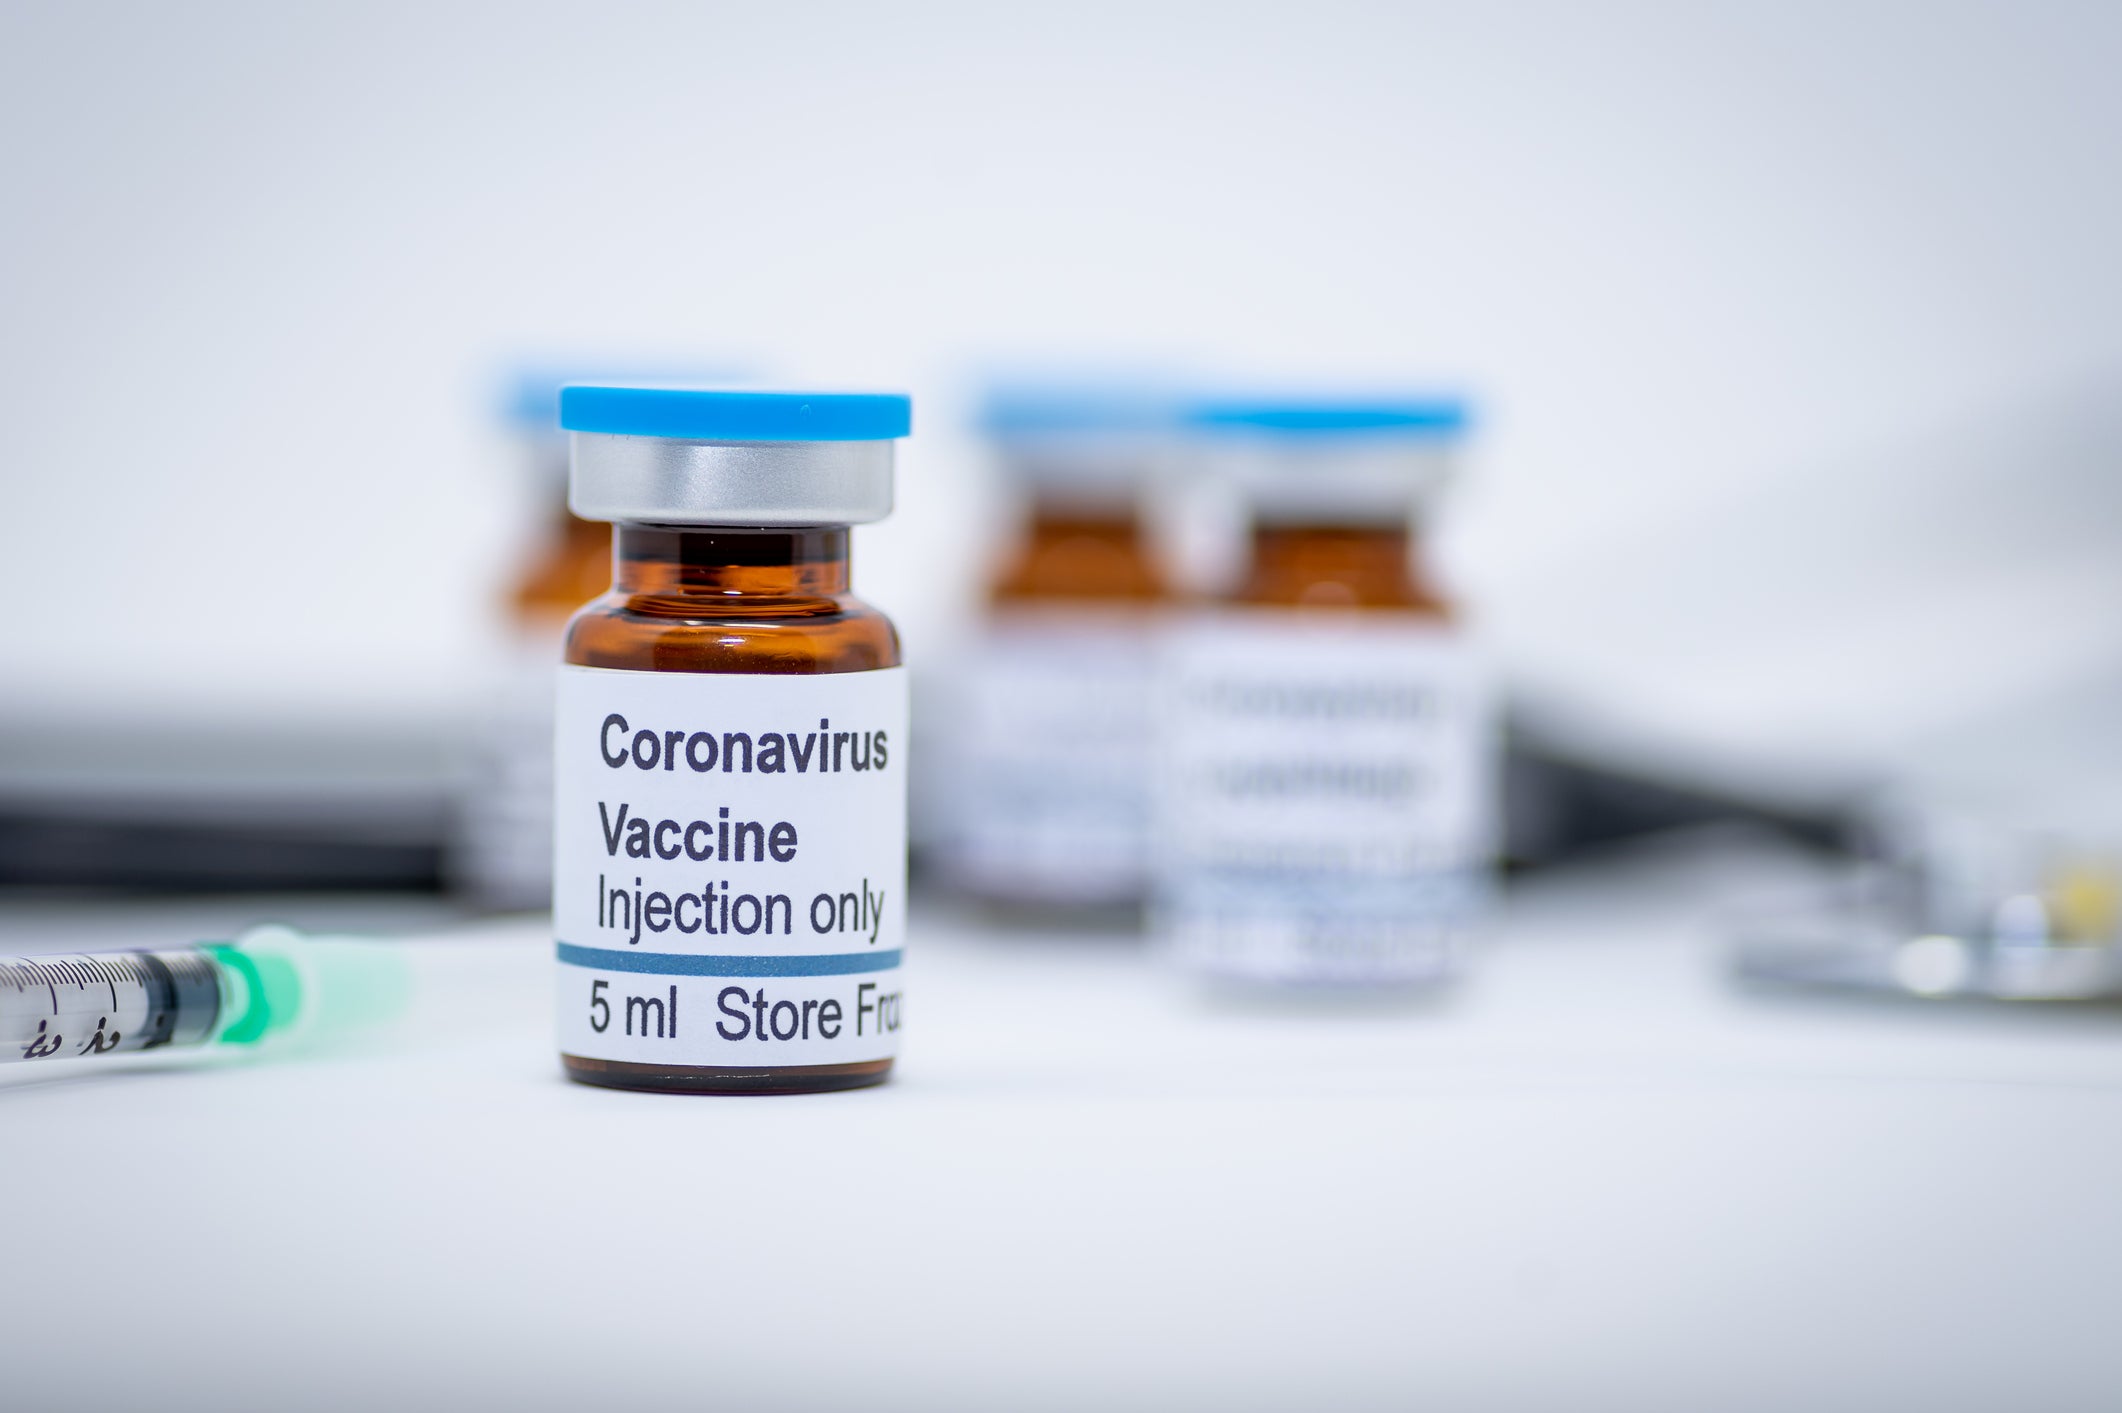 Covid-19 Lockdowns Can't End Until Covid-19 Vaccine Found - Study